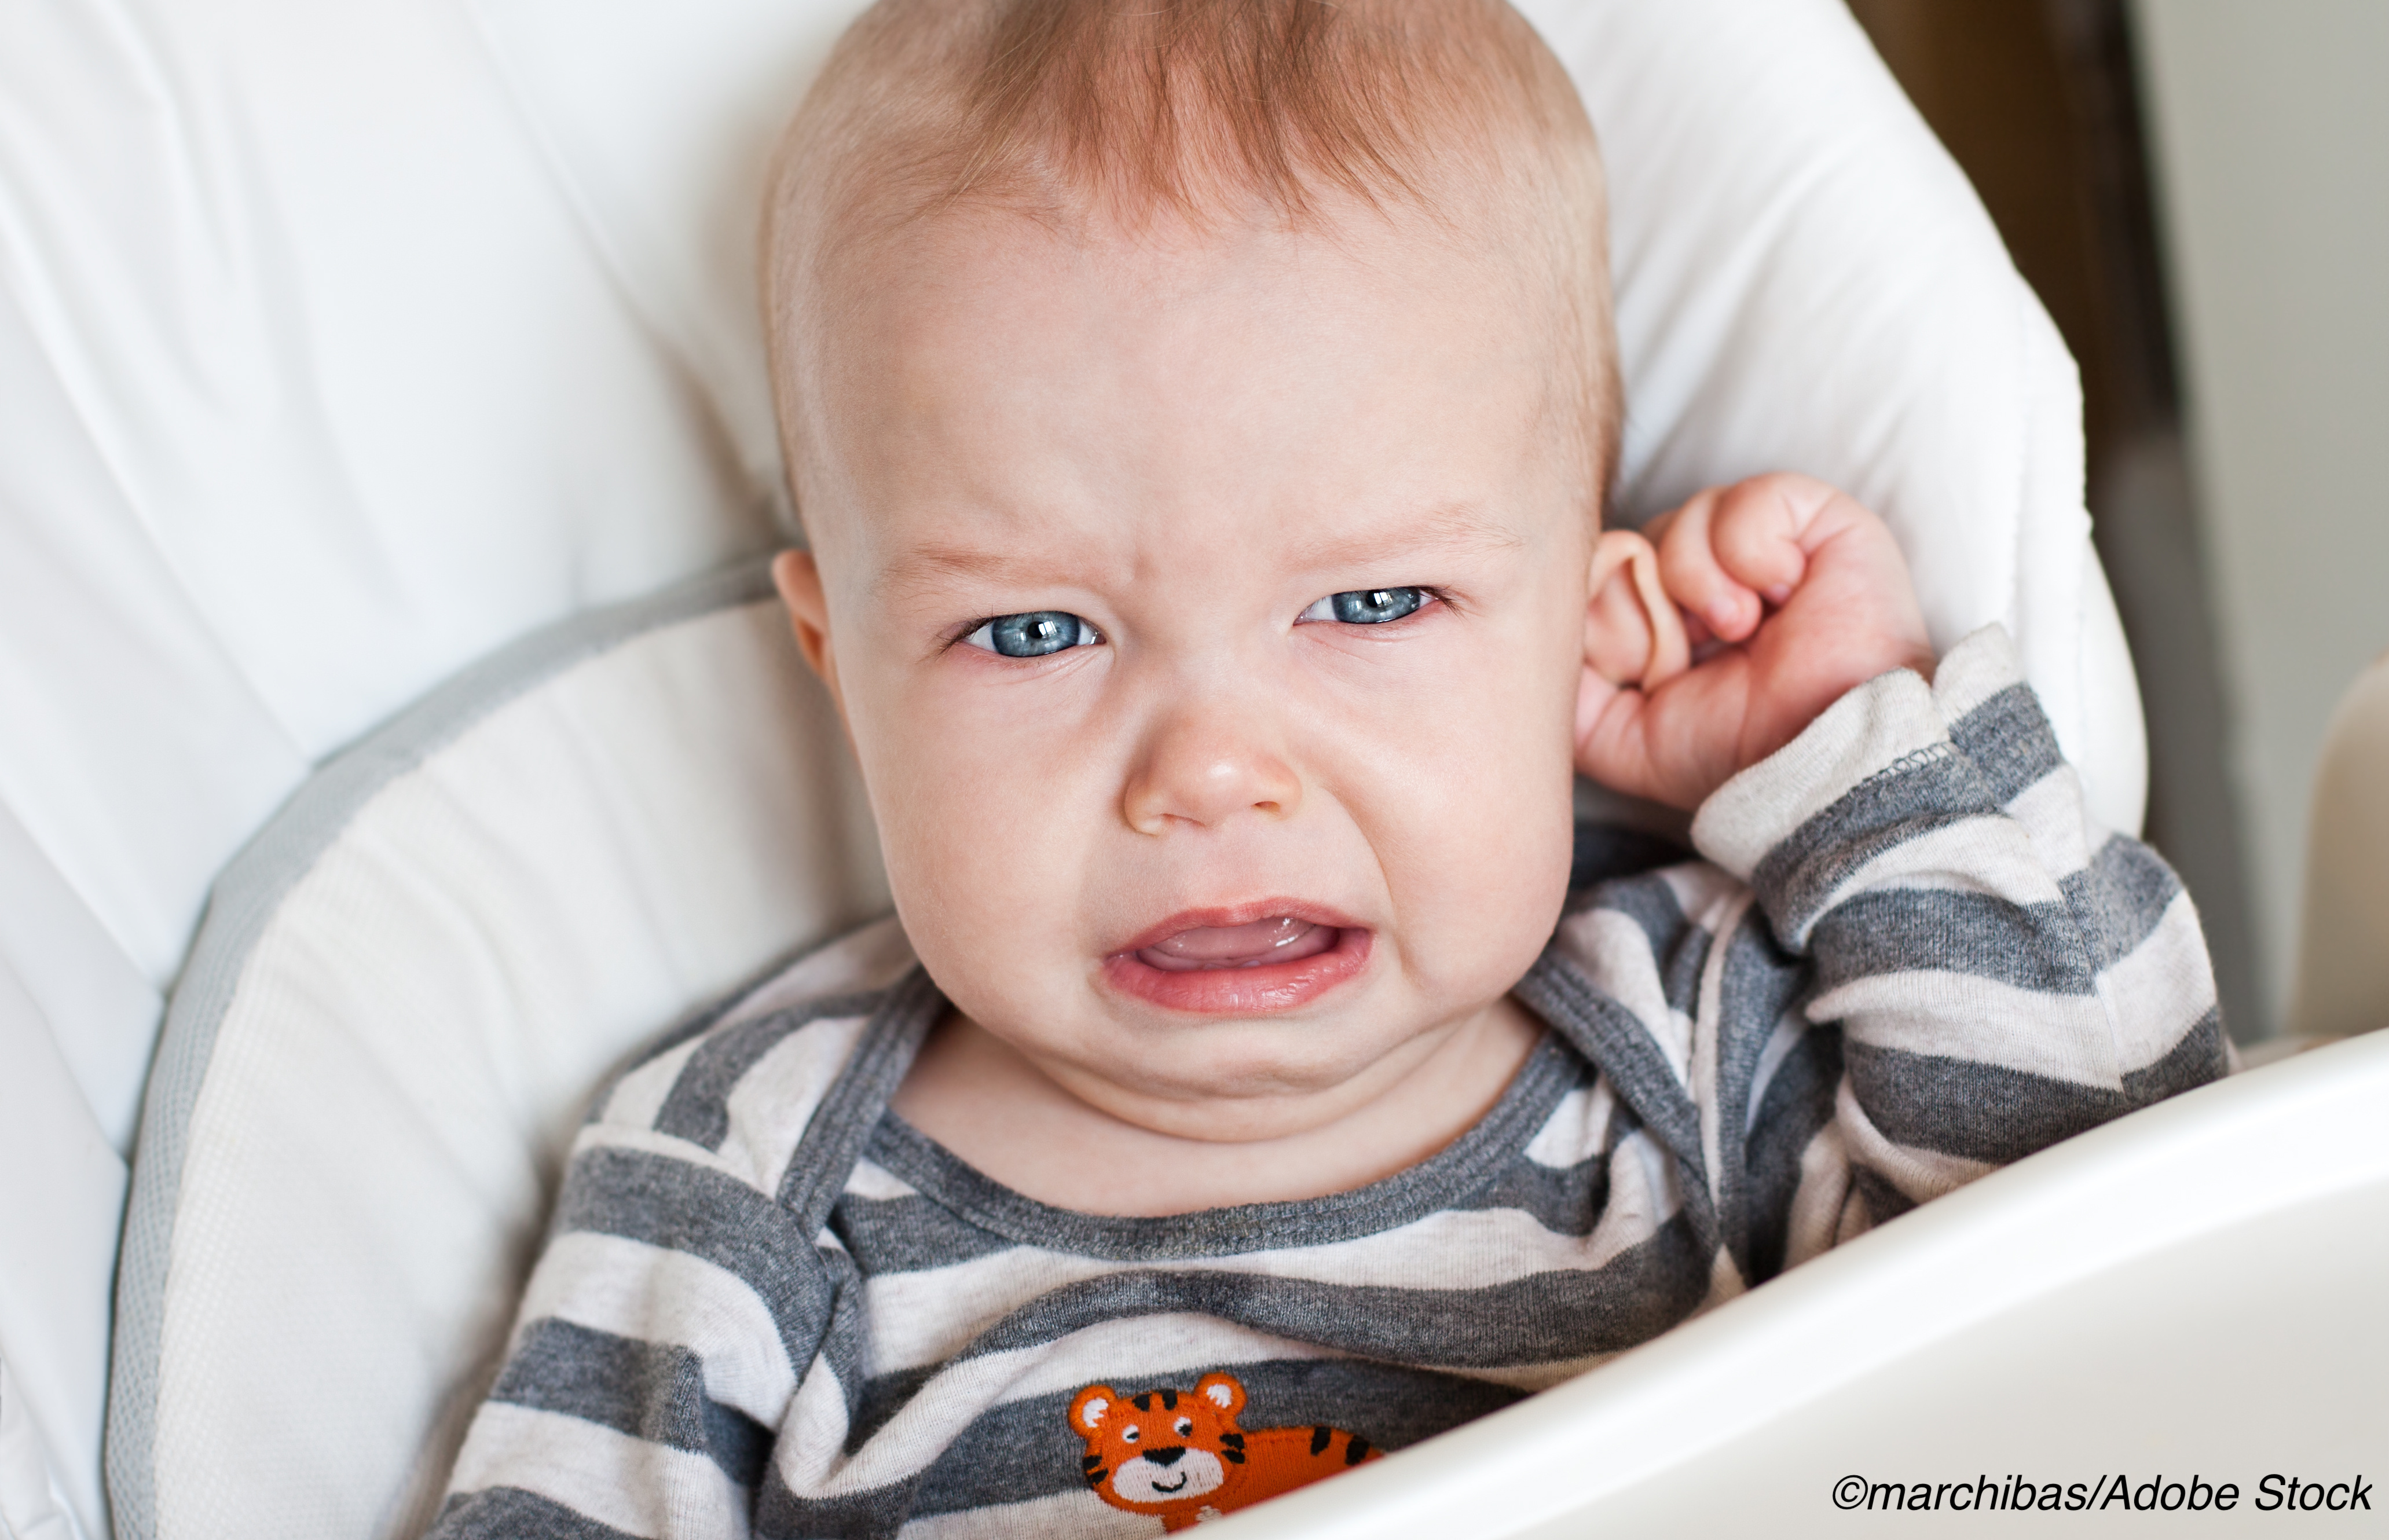 Adverse Events Rare in Afebrile Infants with Ear Infections